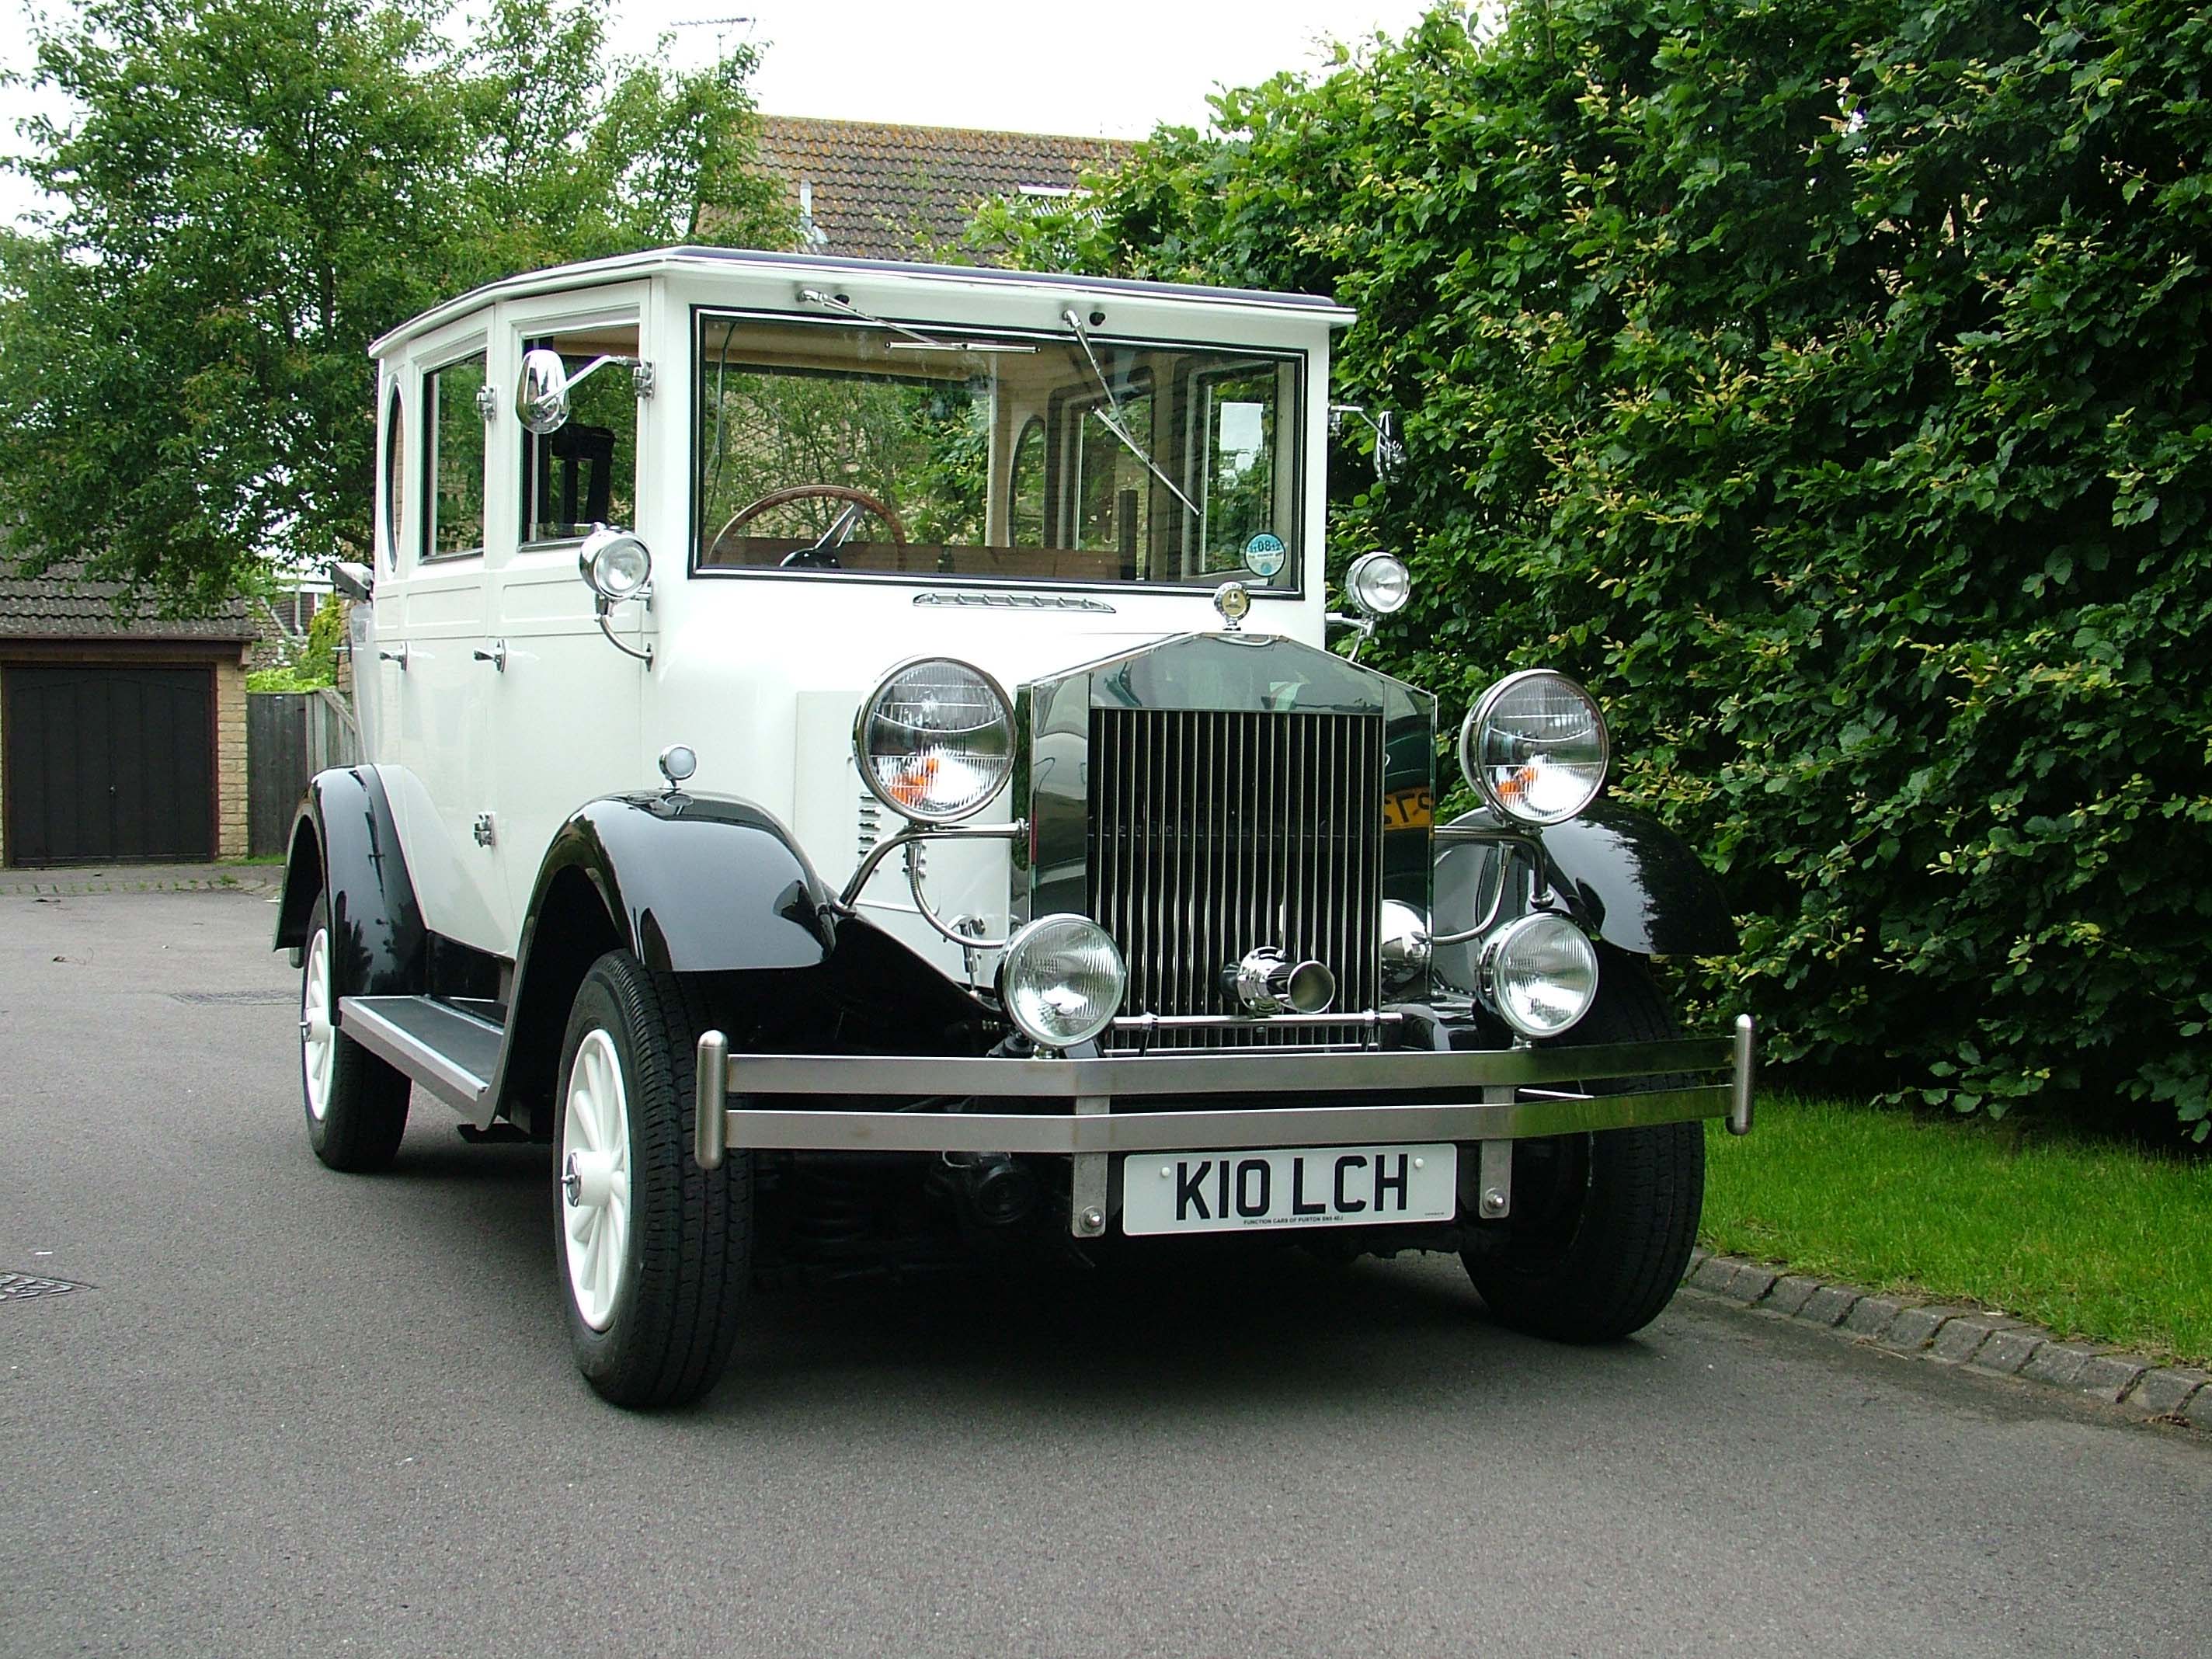 Fisrt picture of Function Cars new Imperial wedding car